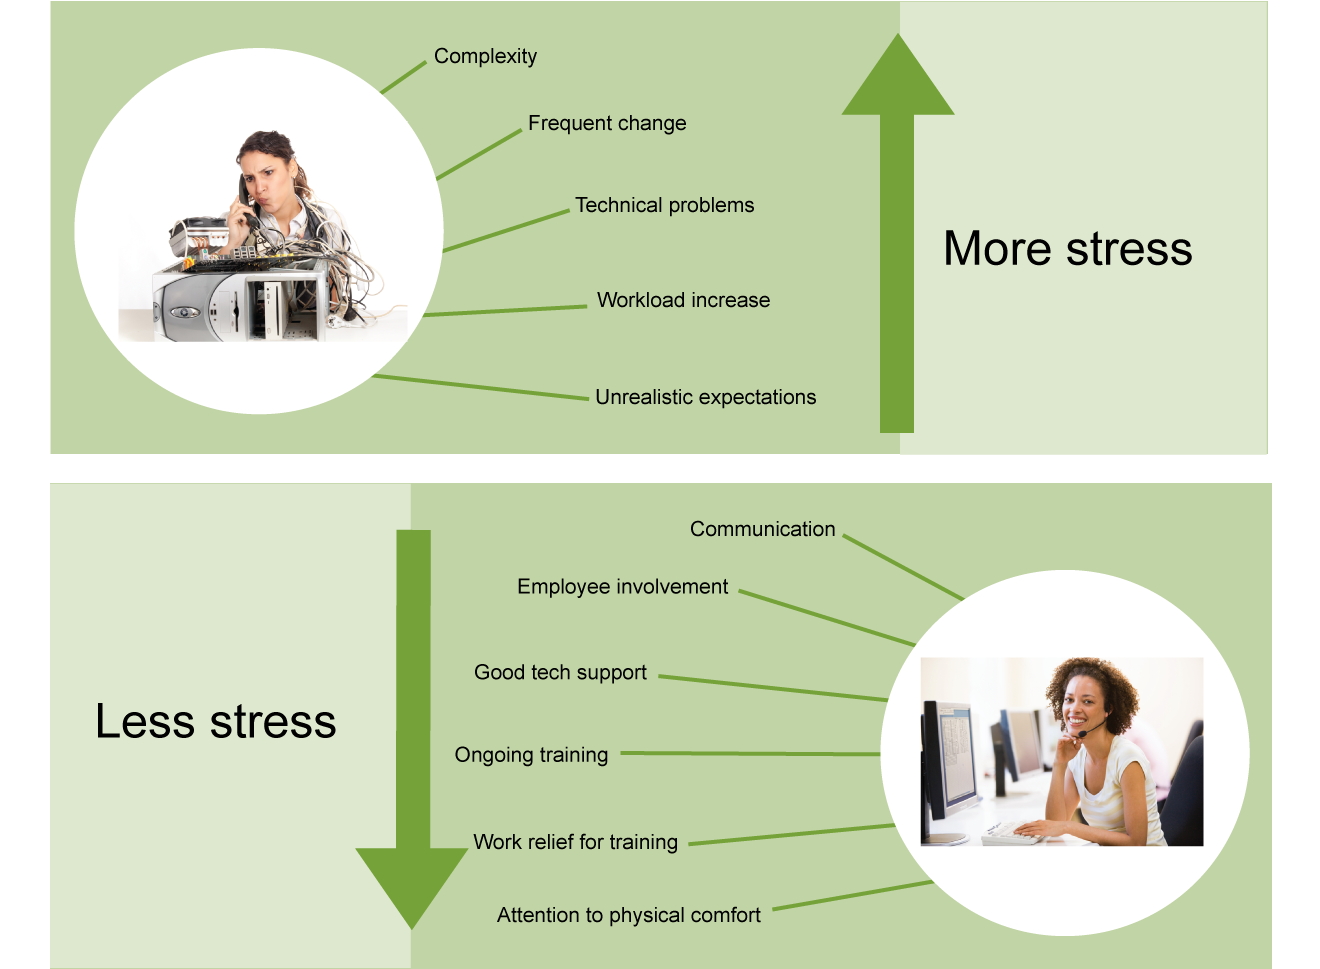 a stressed-out looking telecommunicator and a list of factors that make new technology stressful: complexity, frequent change, technical problems, workload increase, and unrealistic expectations, followed by a happy telecommunicator with a list of factors reduce stress from new technology: communication, employee involvement, good tech support, ongoing training, work relief for training, attention to physical comfort